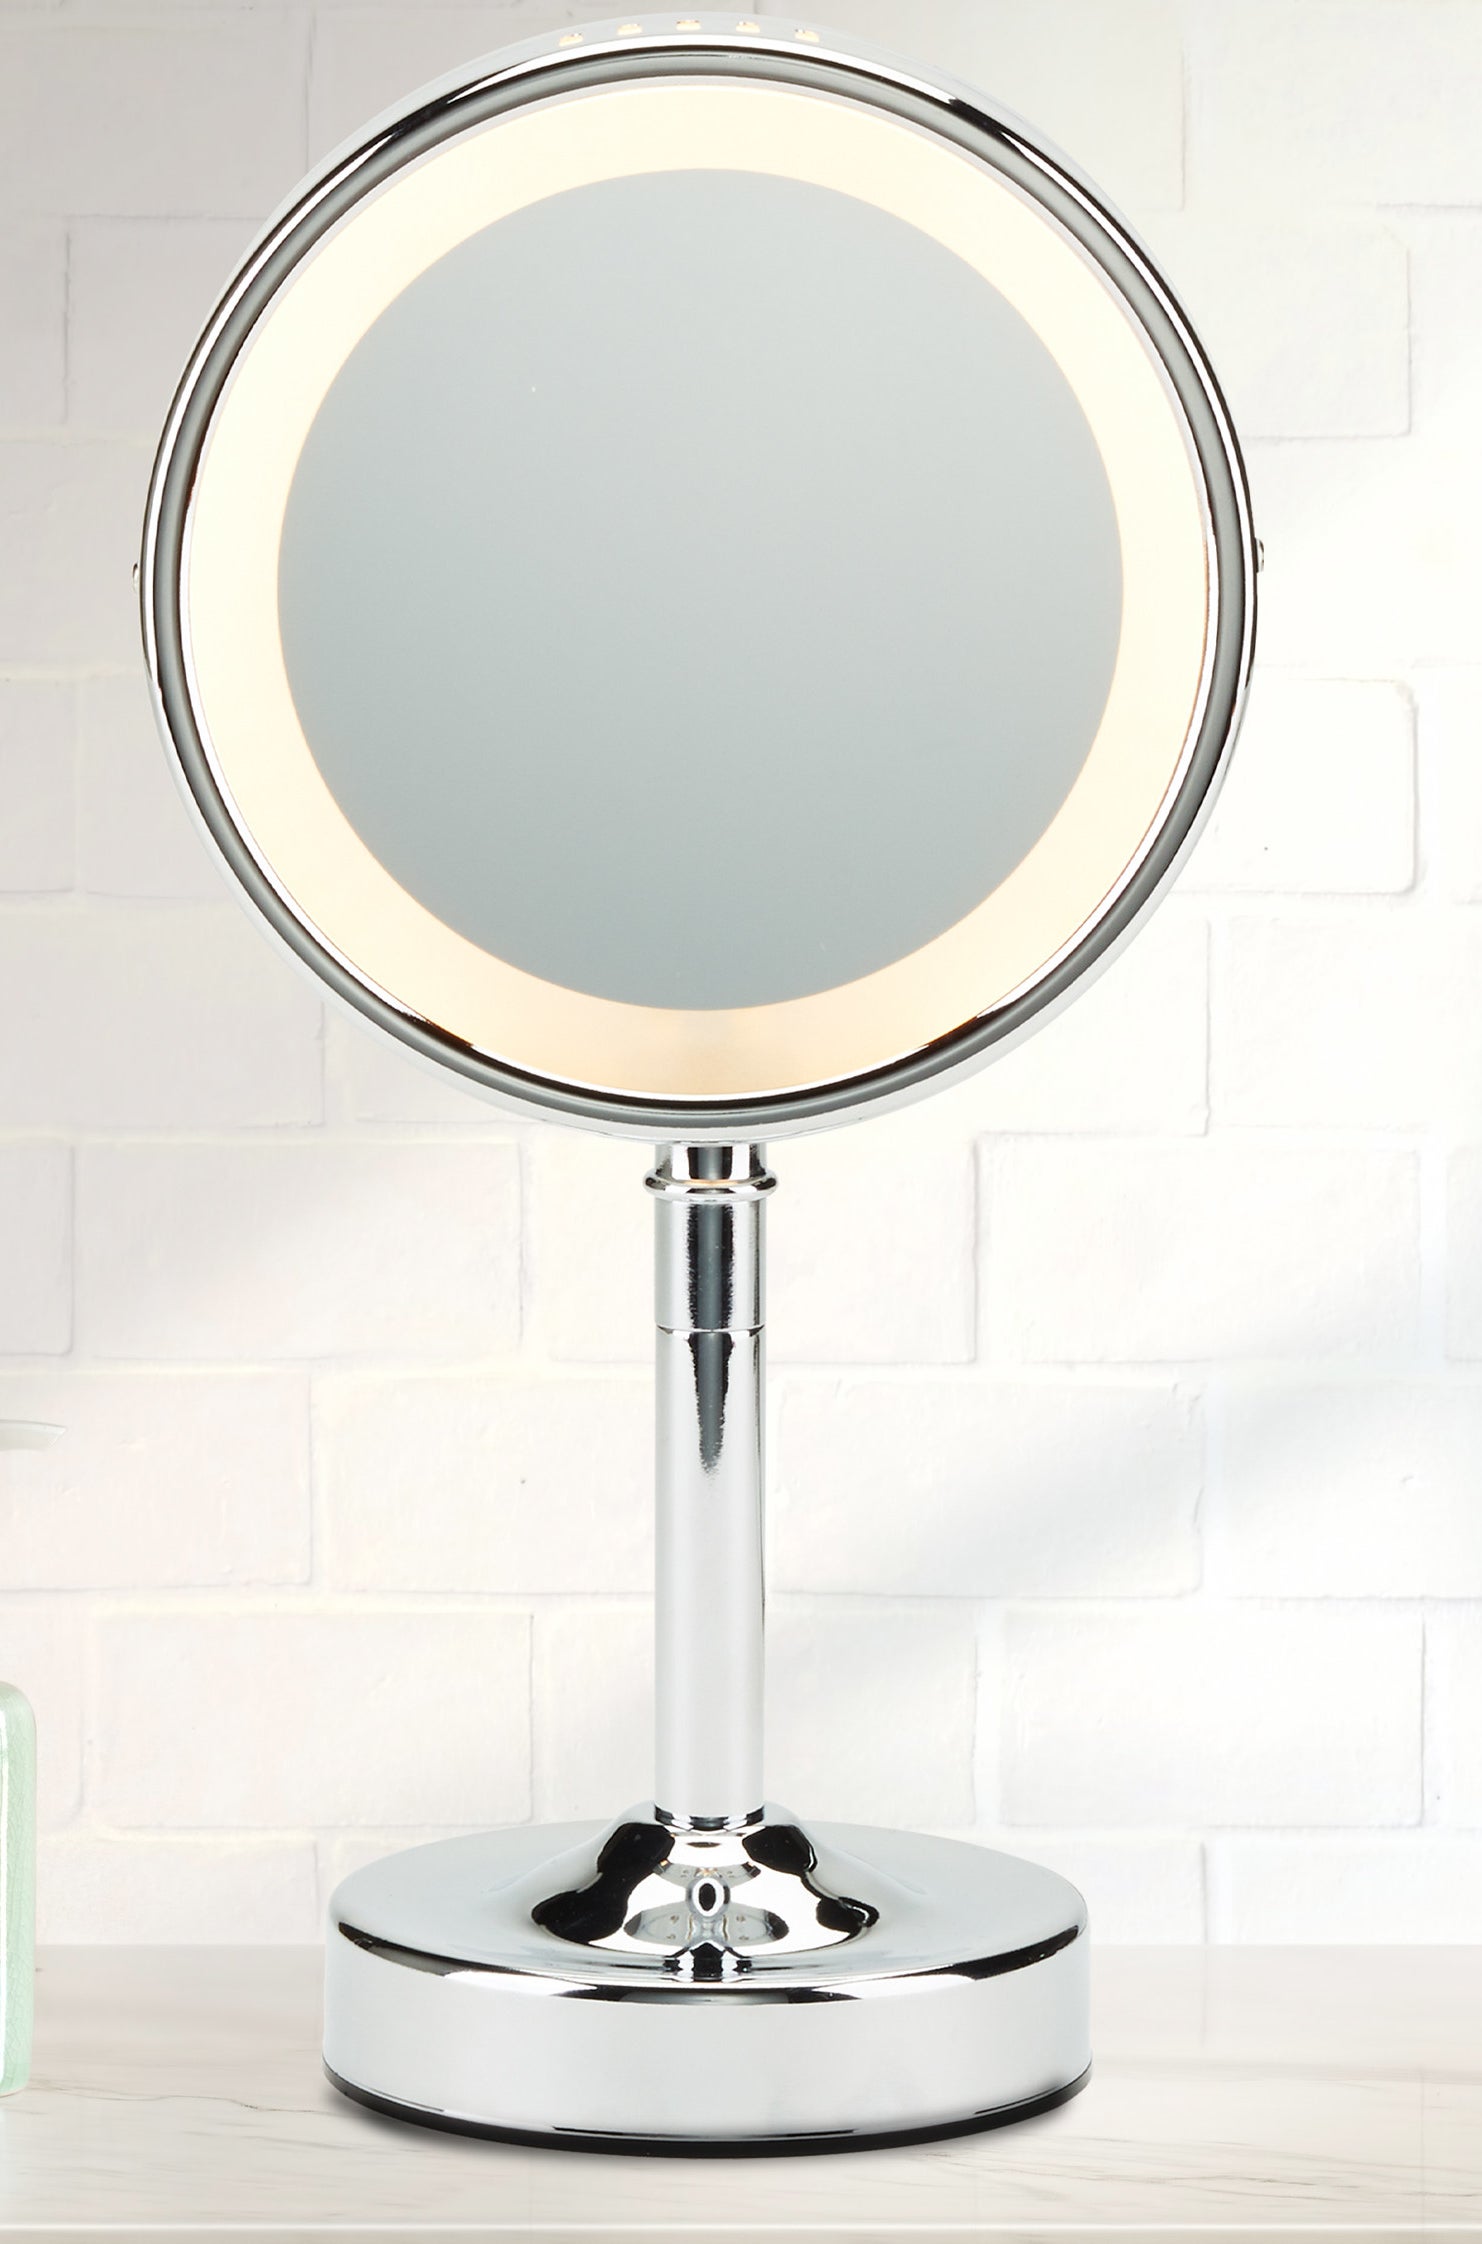 the LED mirror on a counter